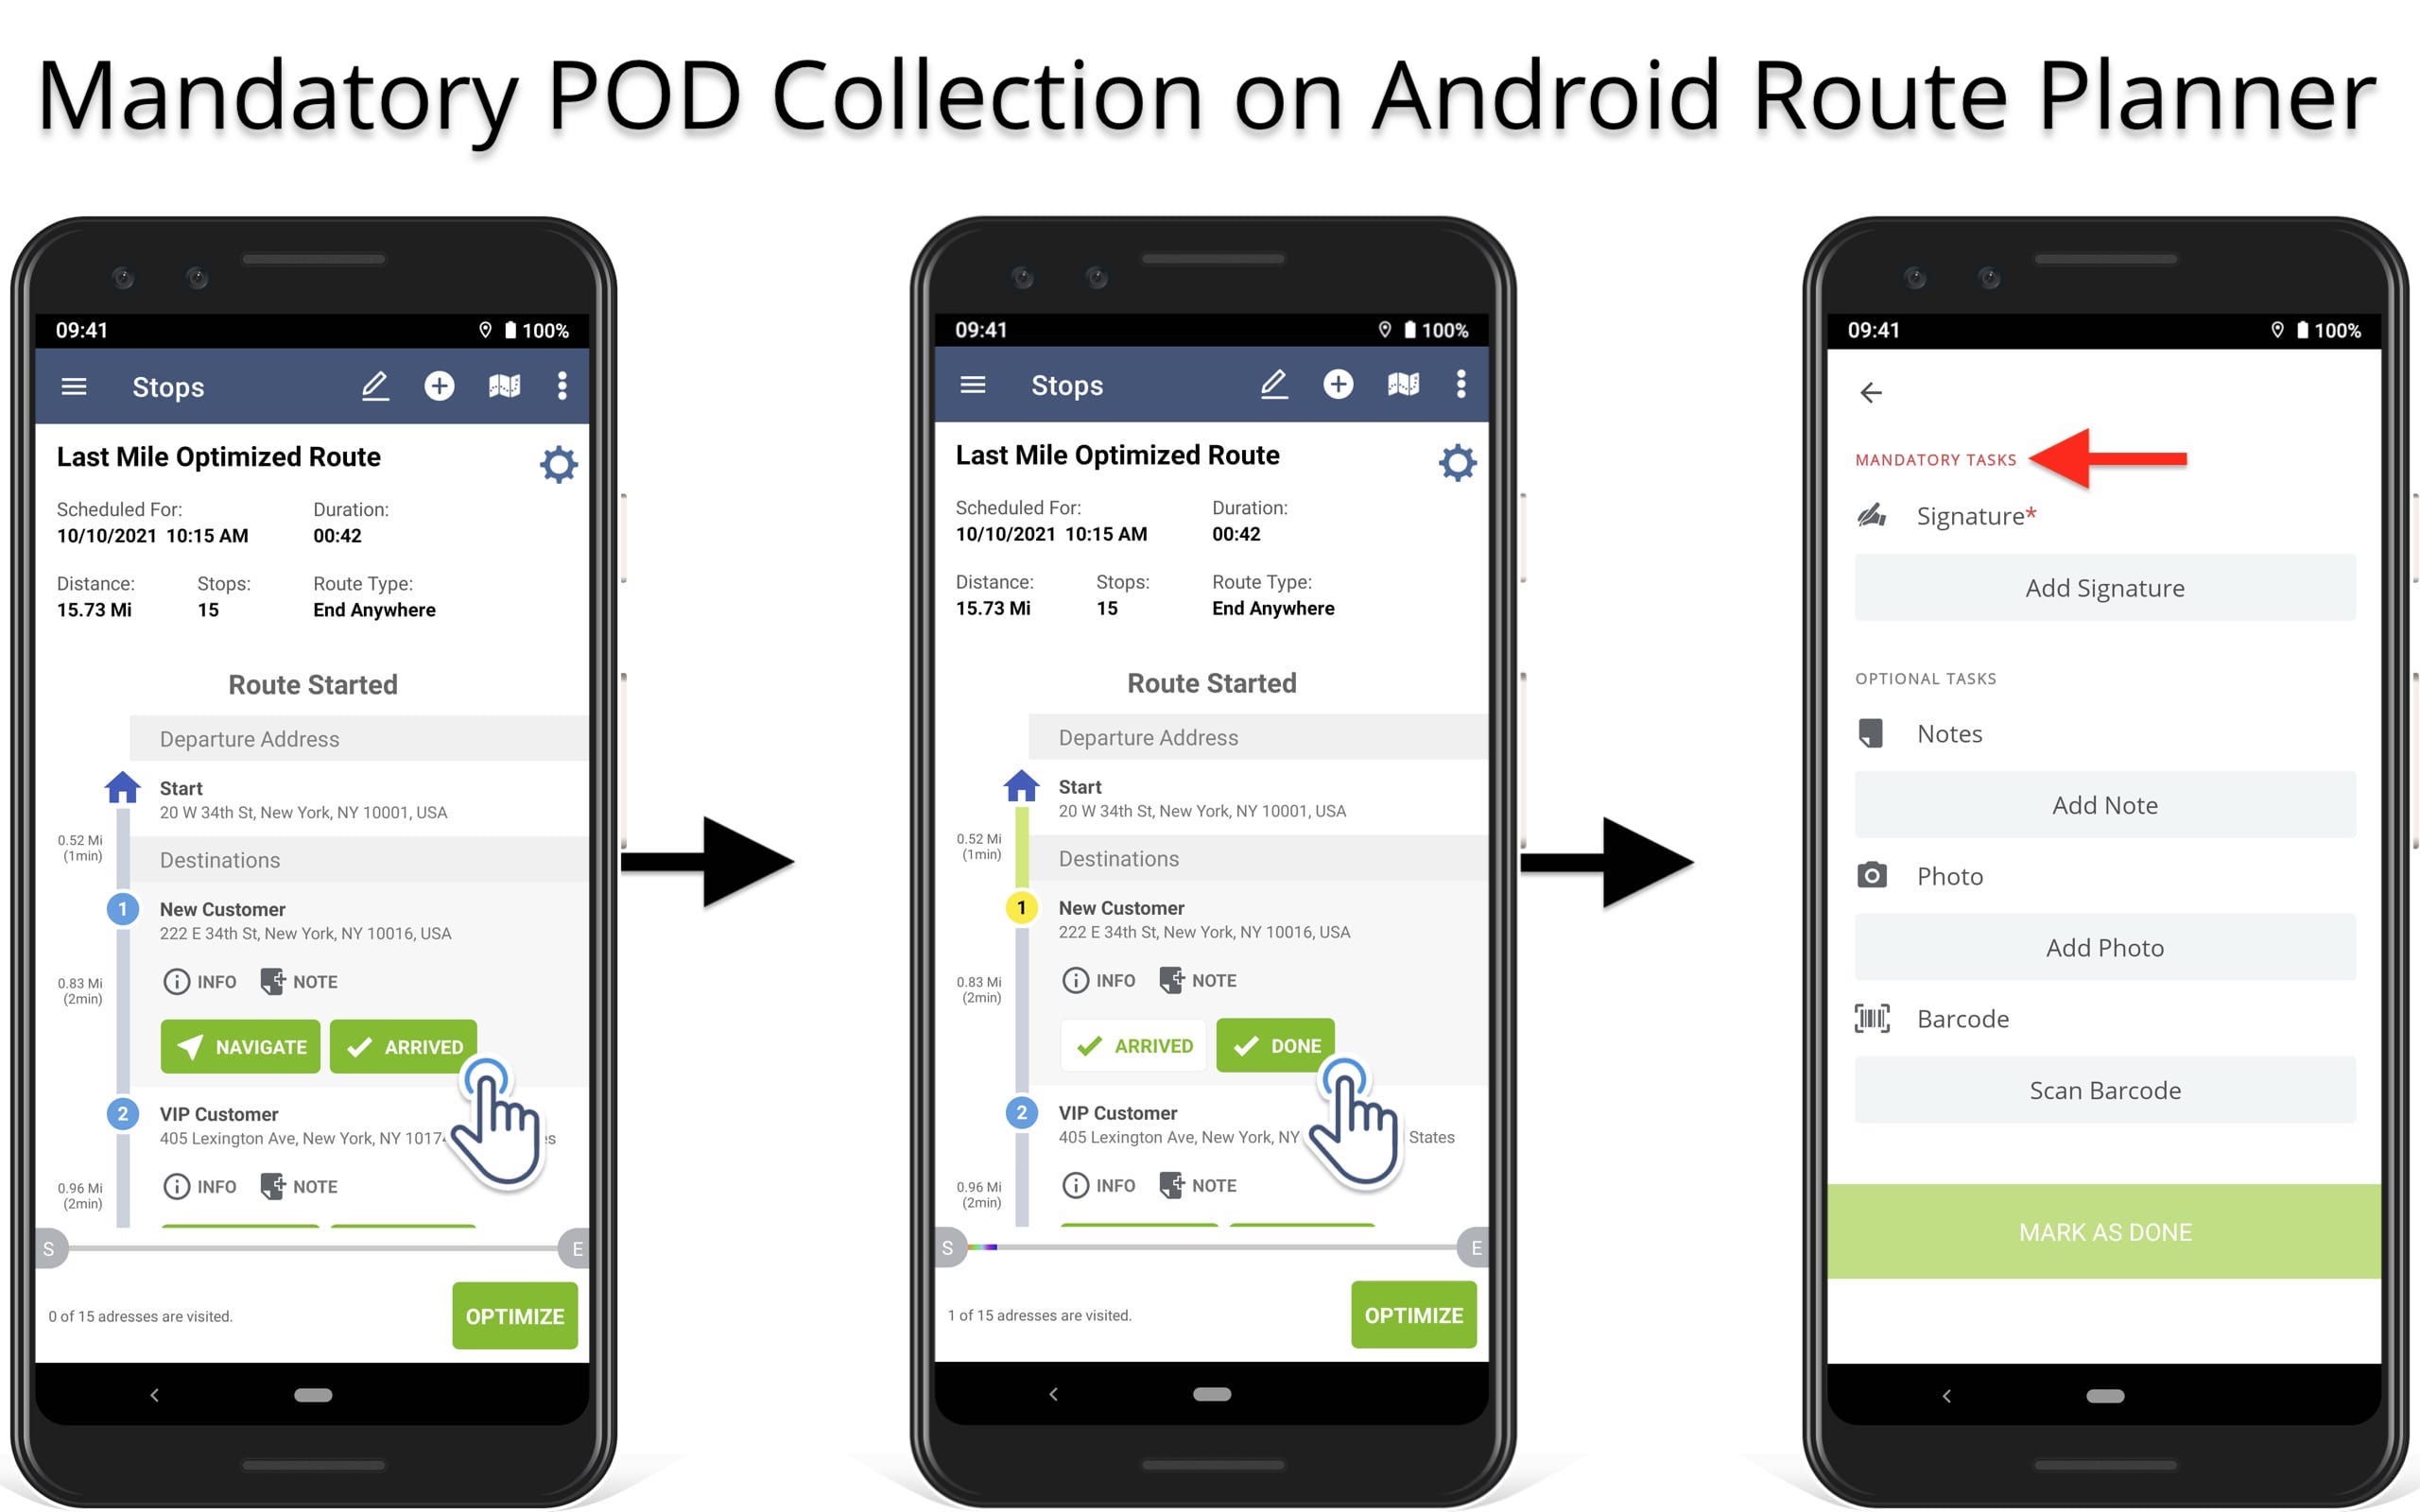 Mandatory proof of delivery customer signatures collection on the Android Route Planner app.